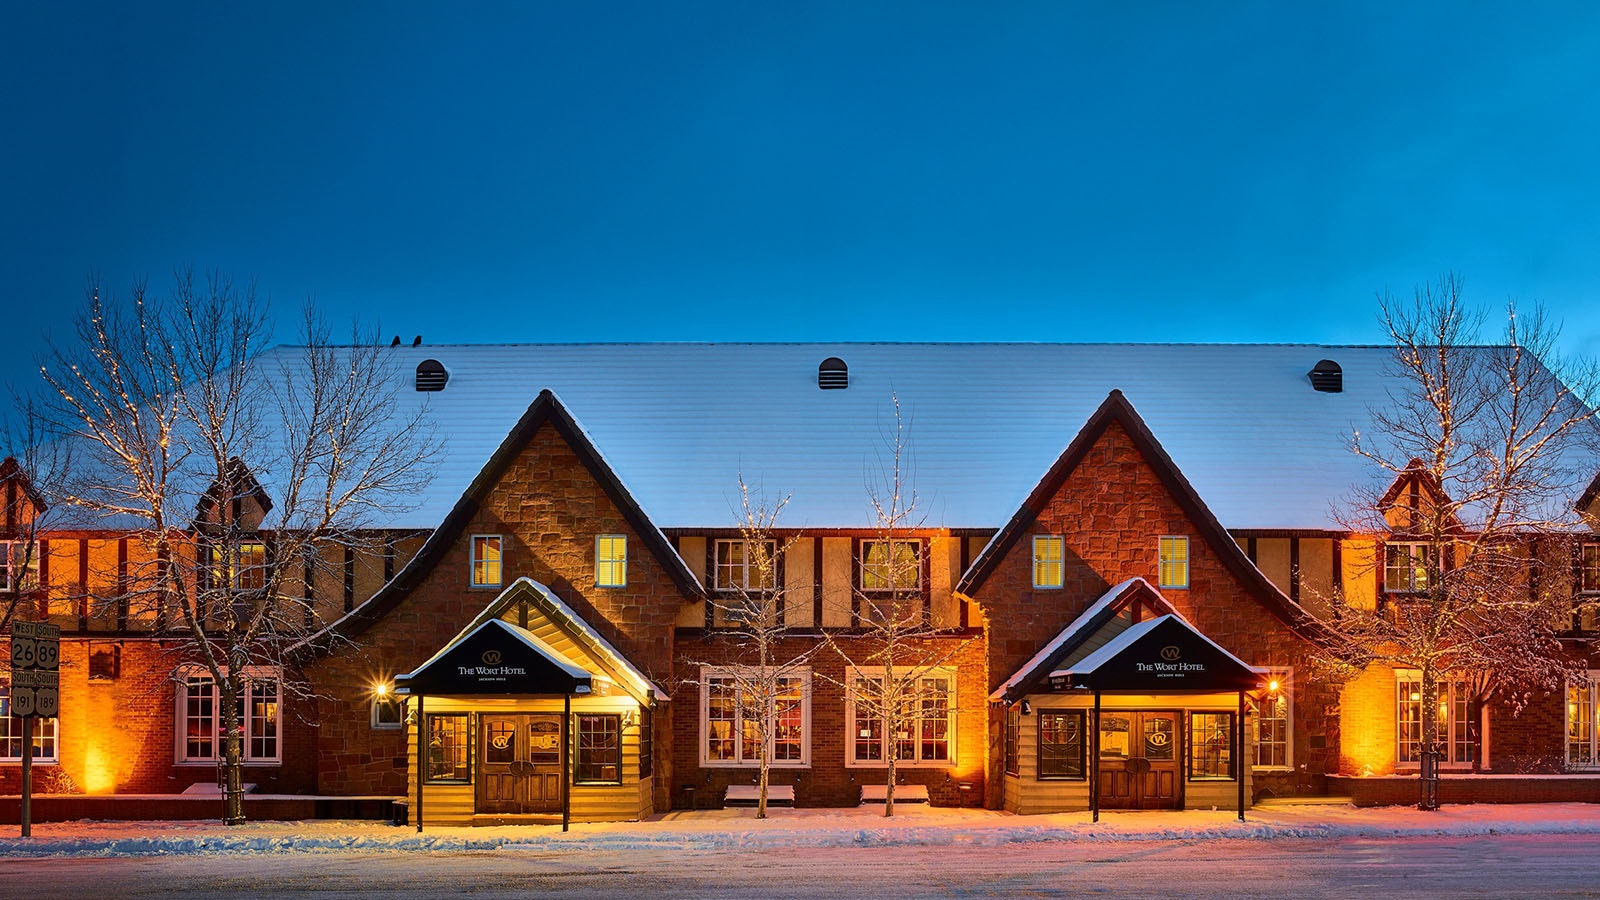 The Wort Hotel is one of the most recognizable and known buildings in Jackson, Wyoming.